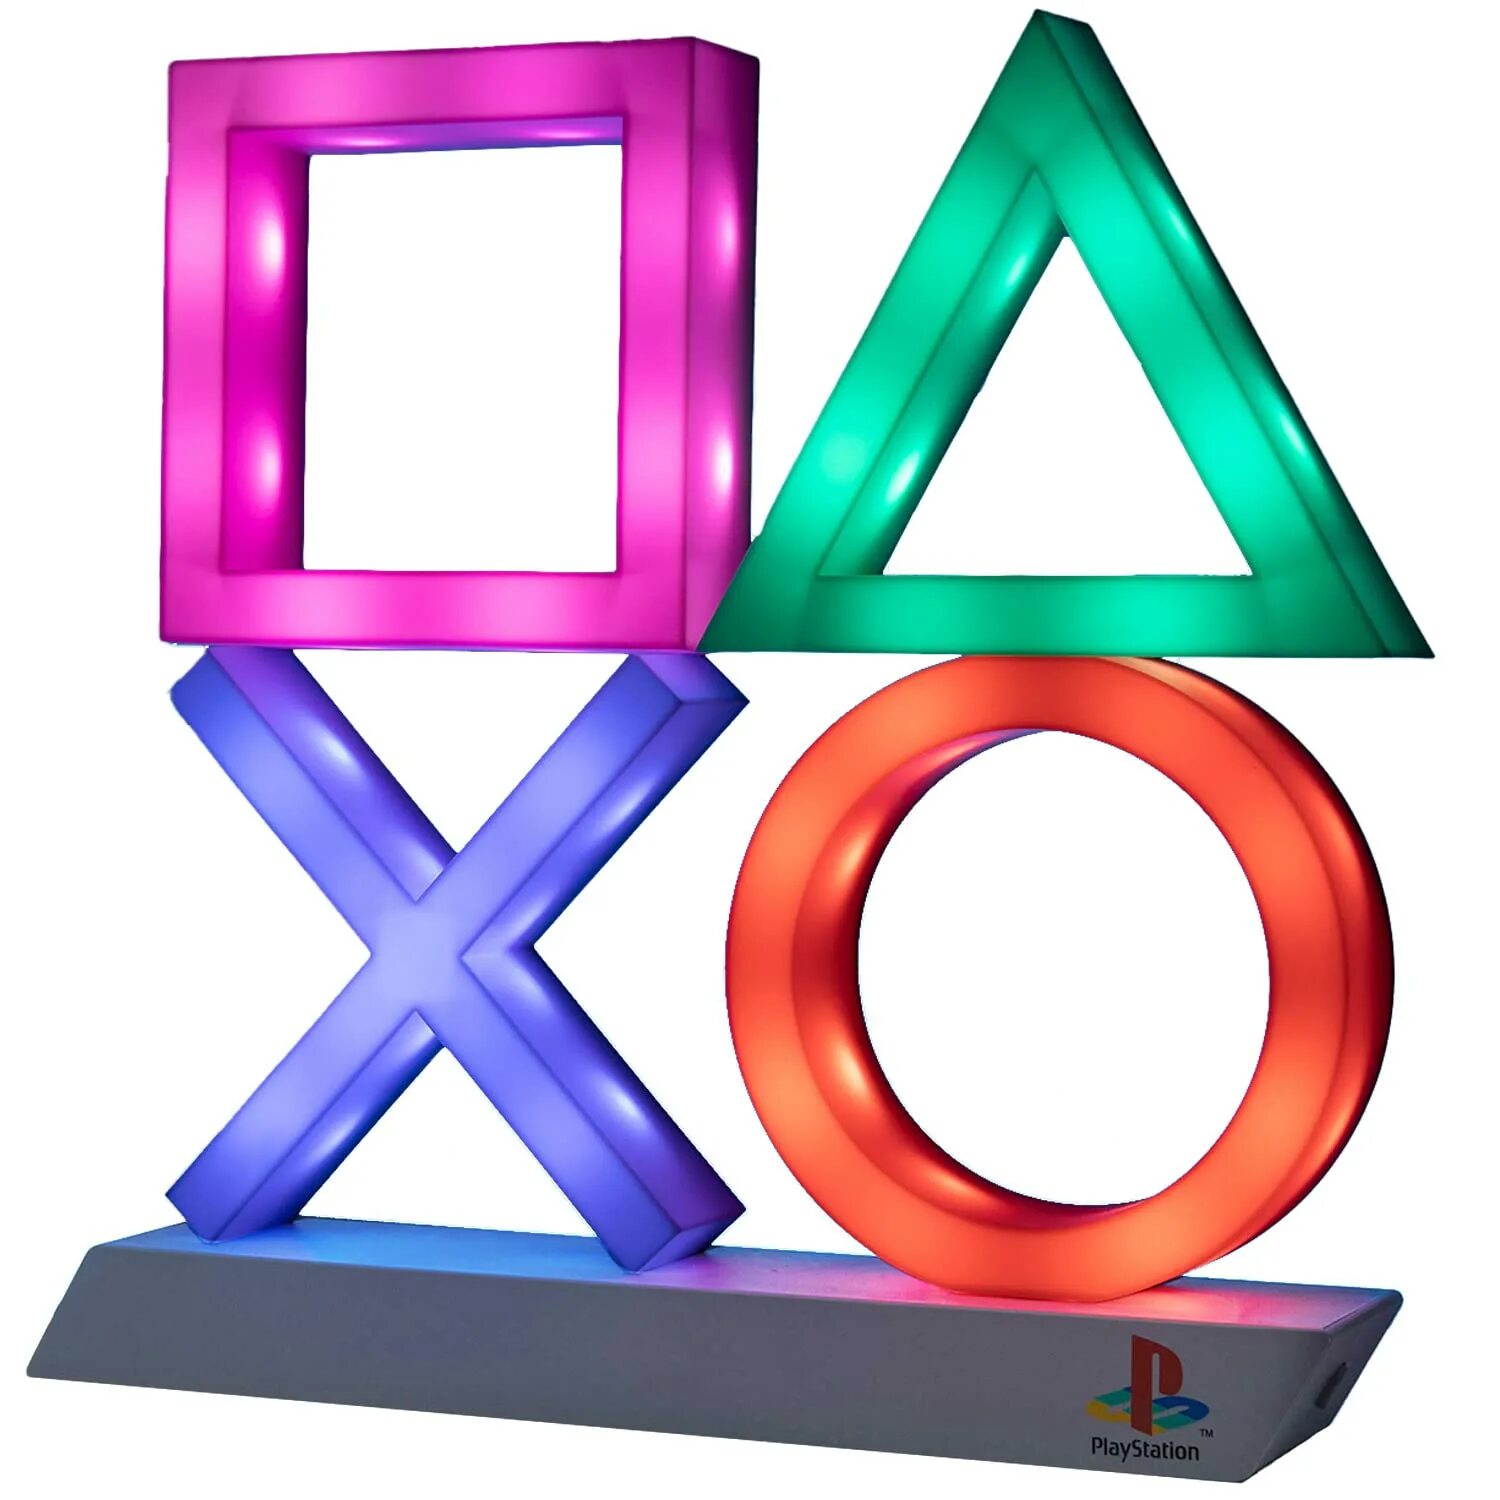 Playstation icon. PS icon. Led Eco Lighting icon.